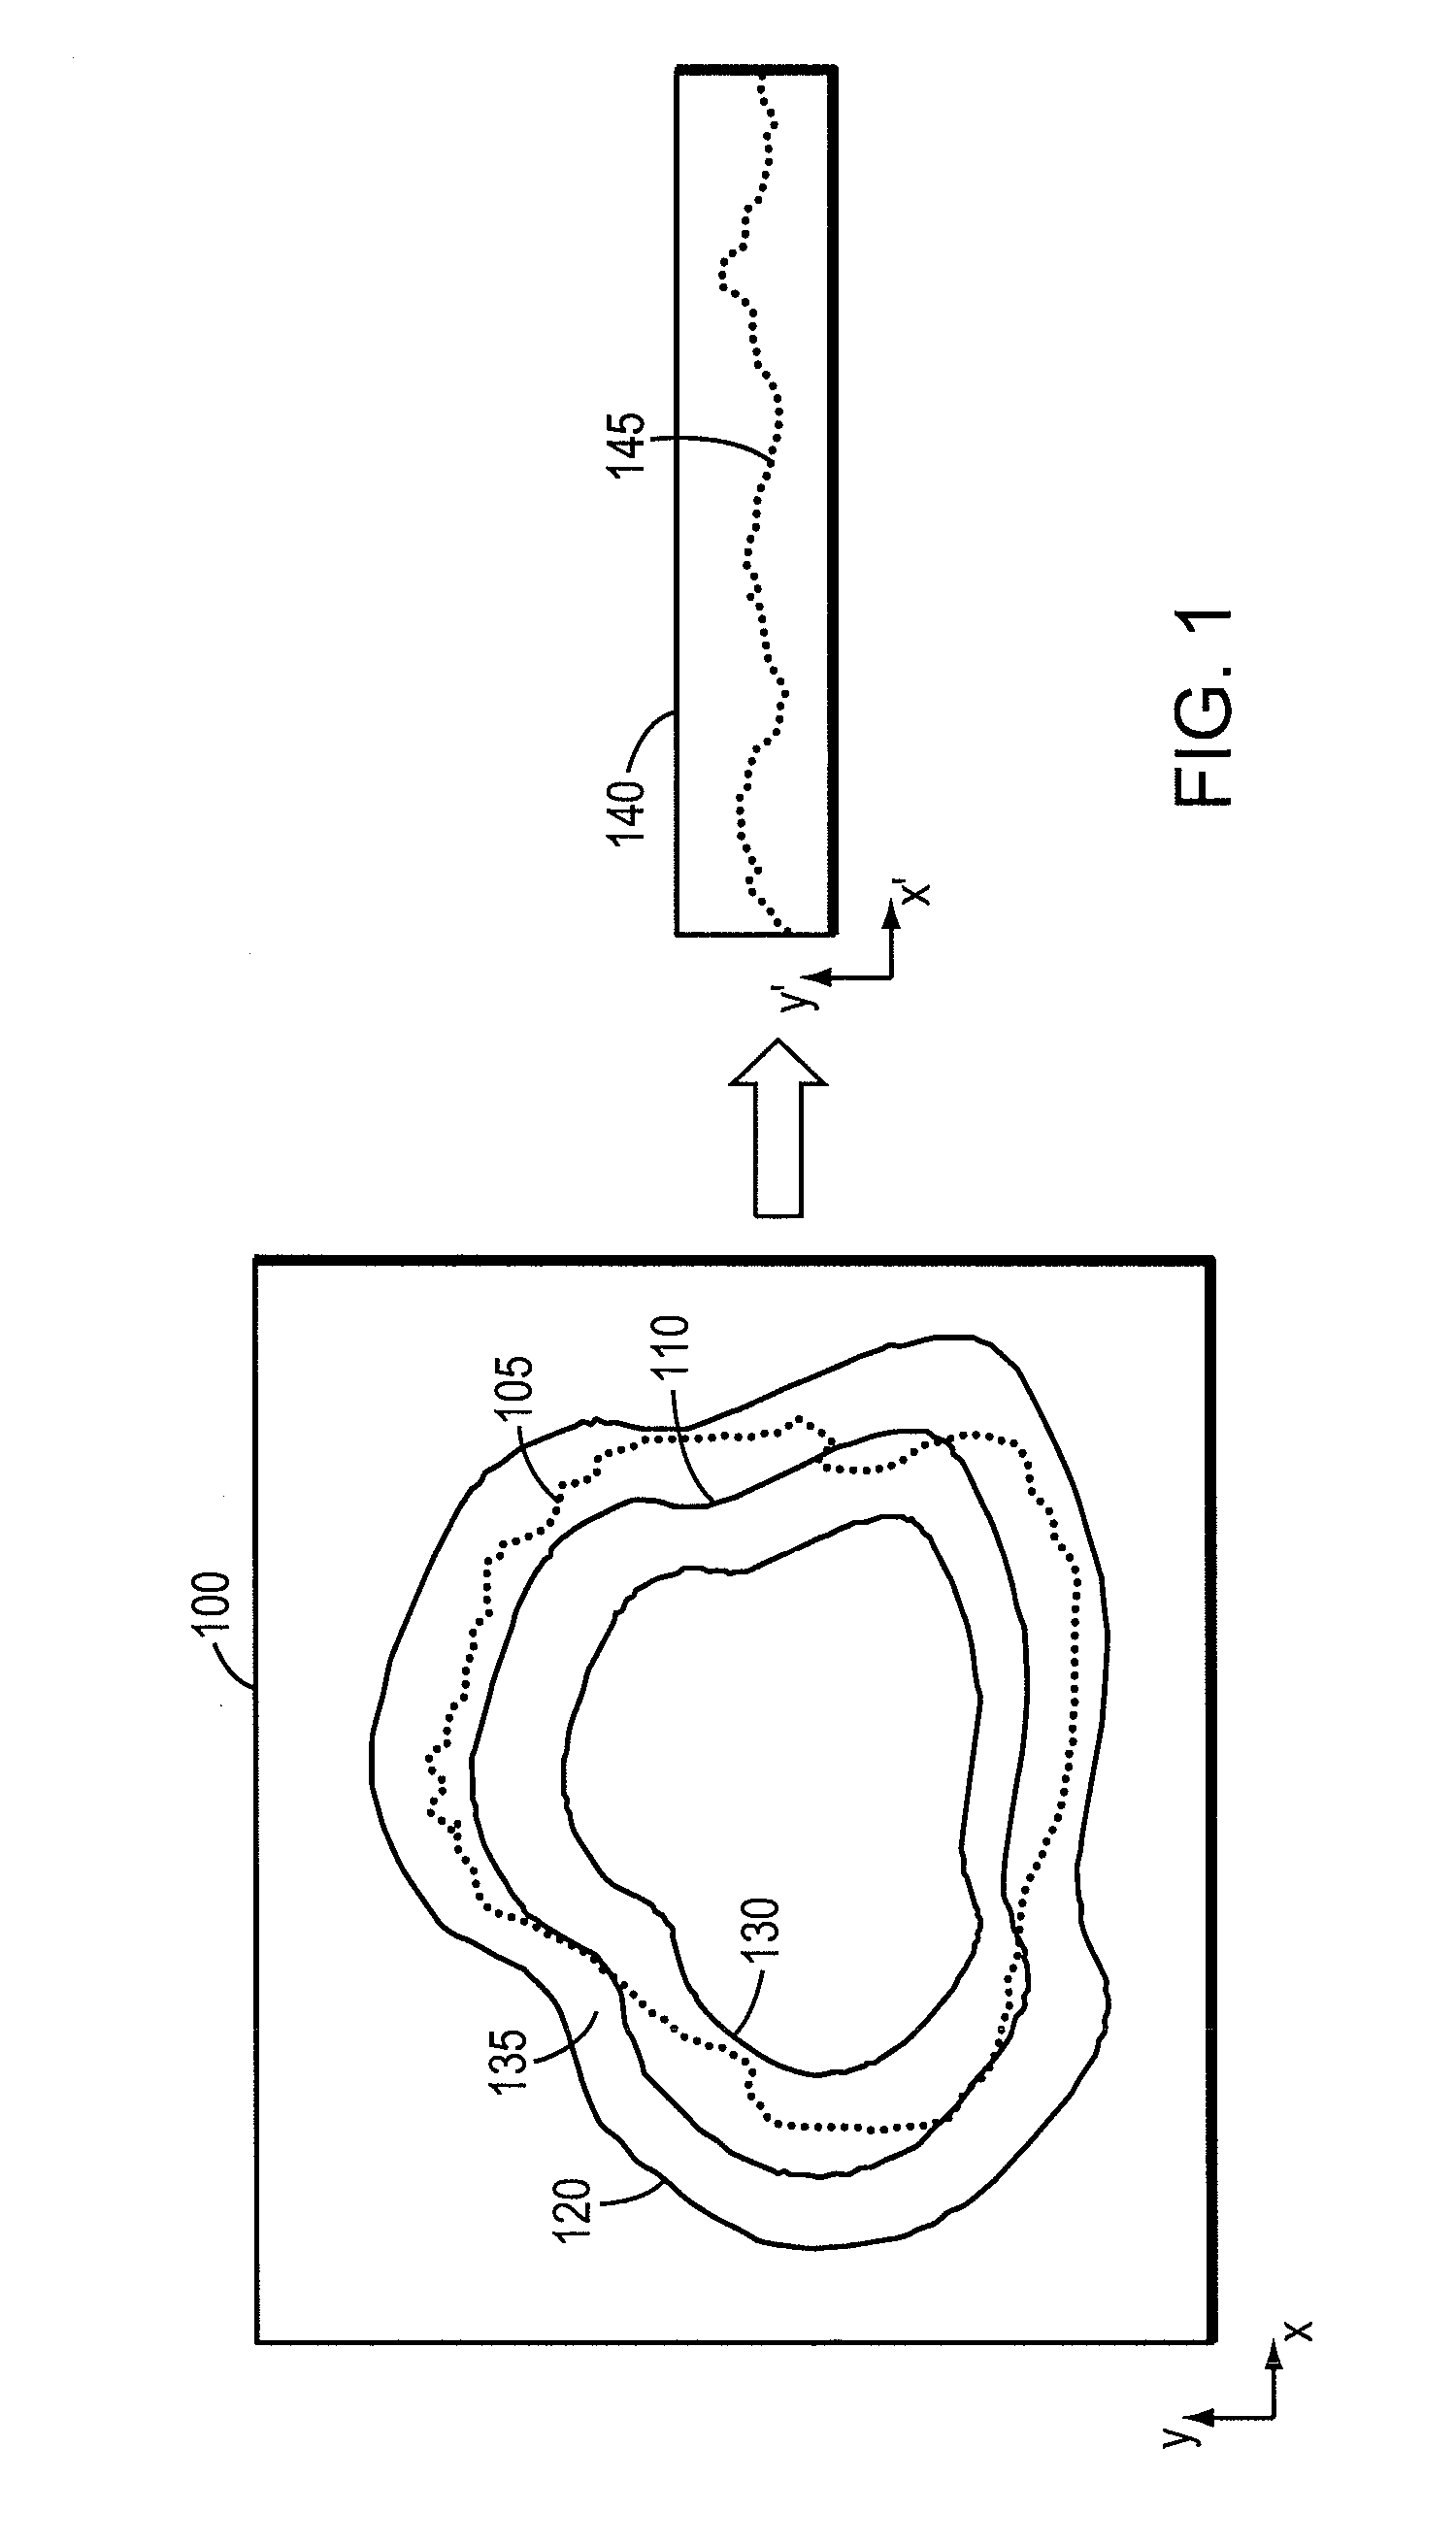 Methods and systems for segmentation using boundary reparameterization